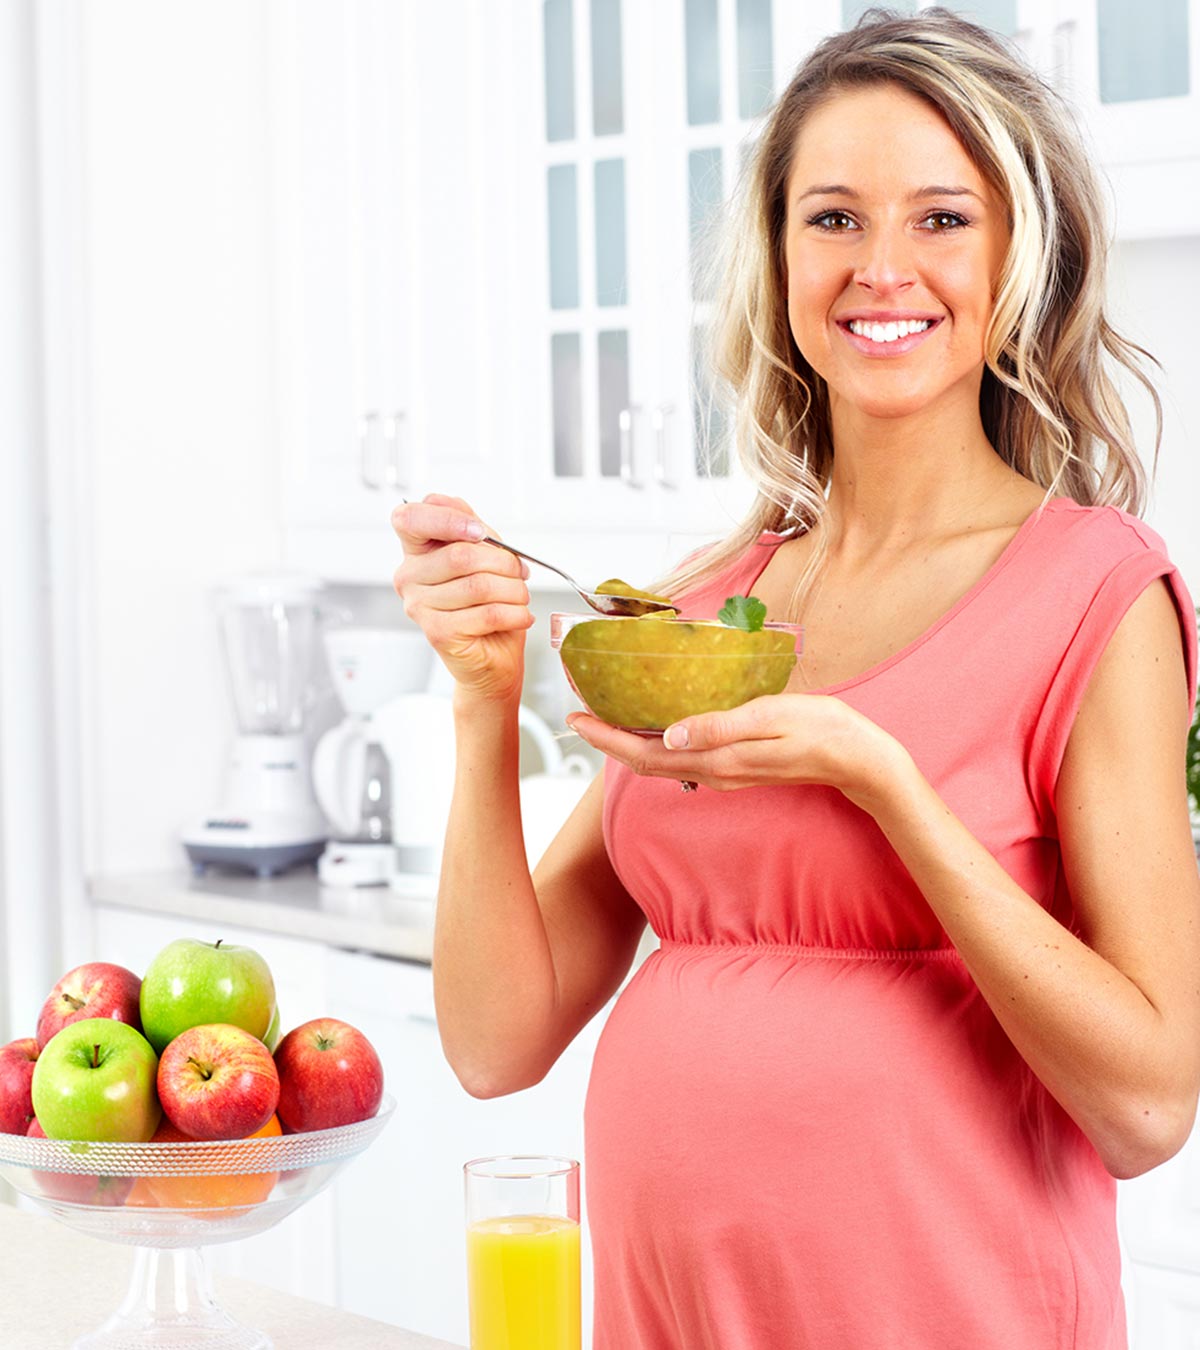 Lentils During Pregnancy: 8 Nutritional Benefits & Cooking Tips